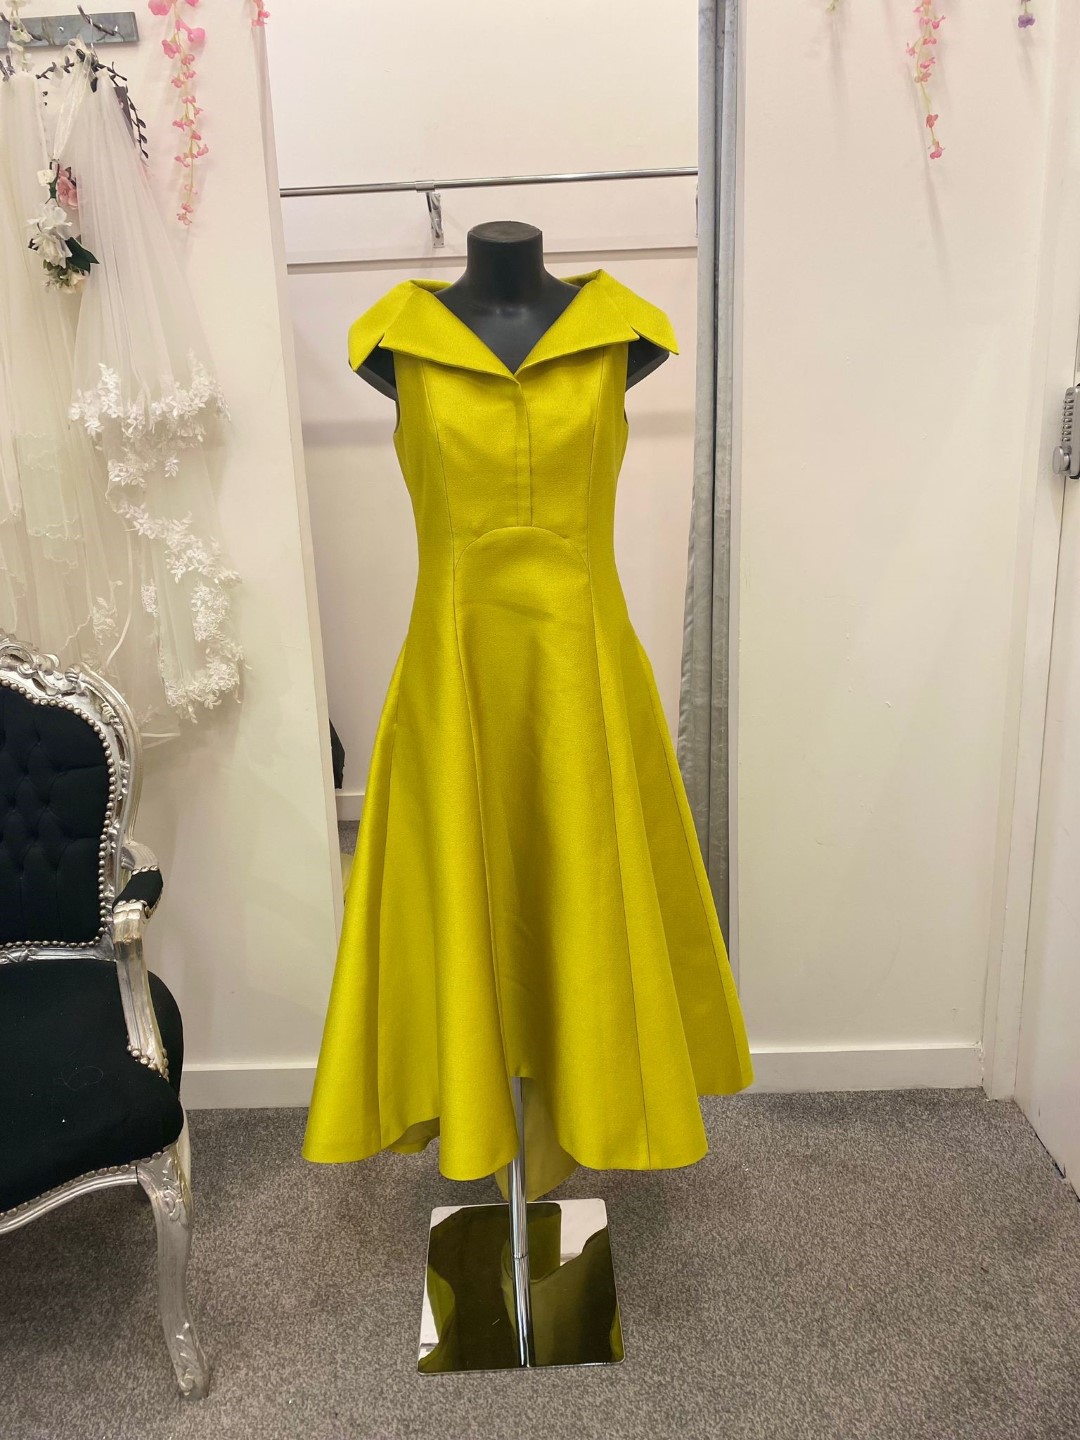 FELY CAMPO 23014 DRESS YELLOW | WEDDIGN GUEST DRESS